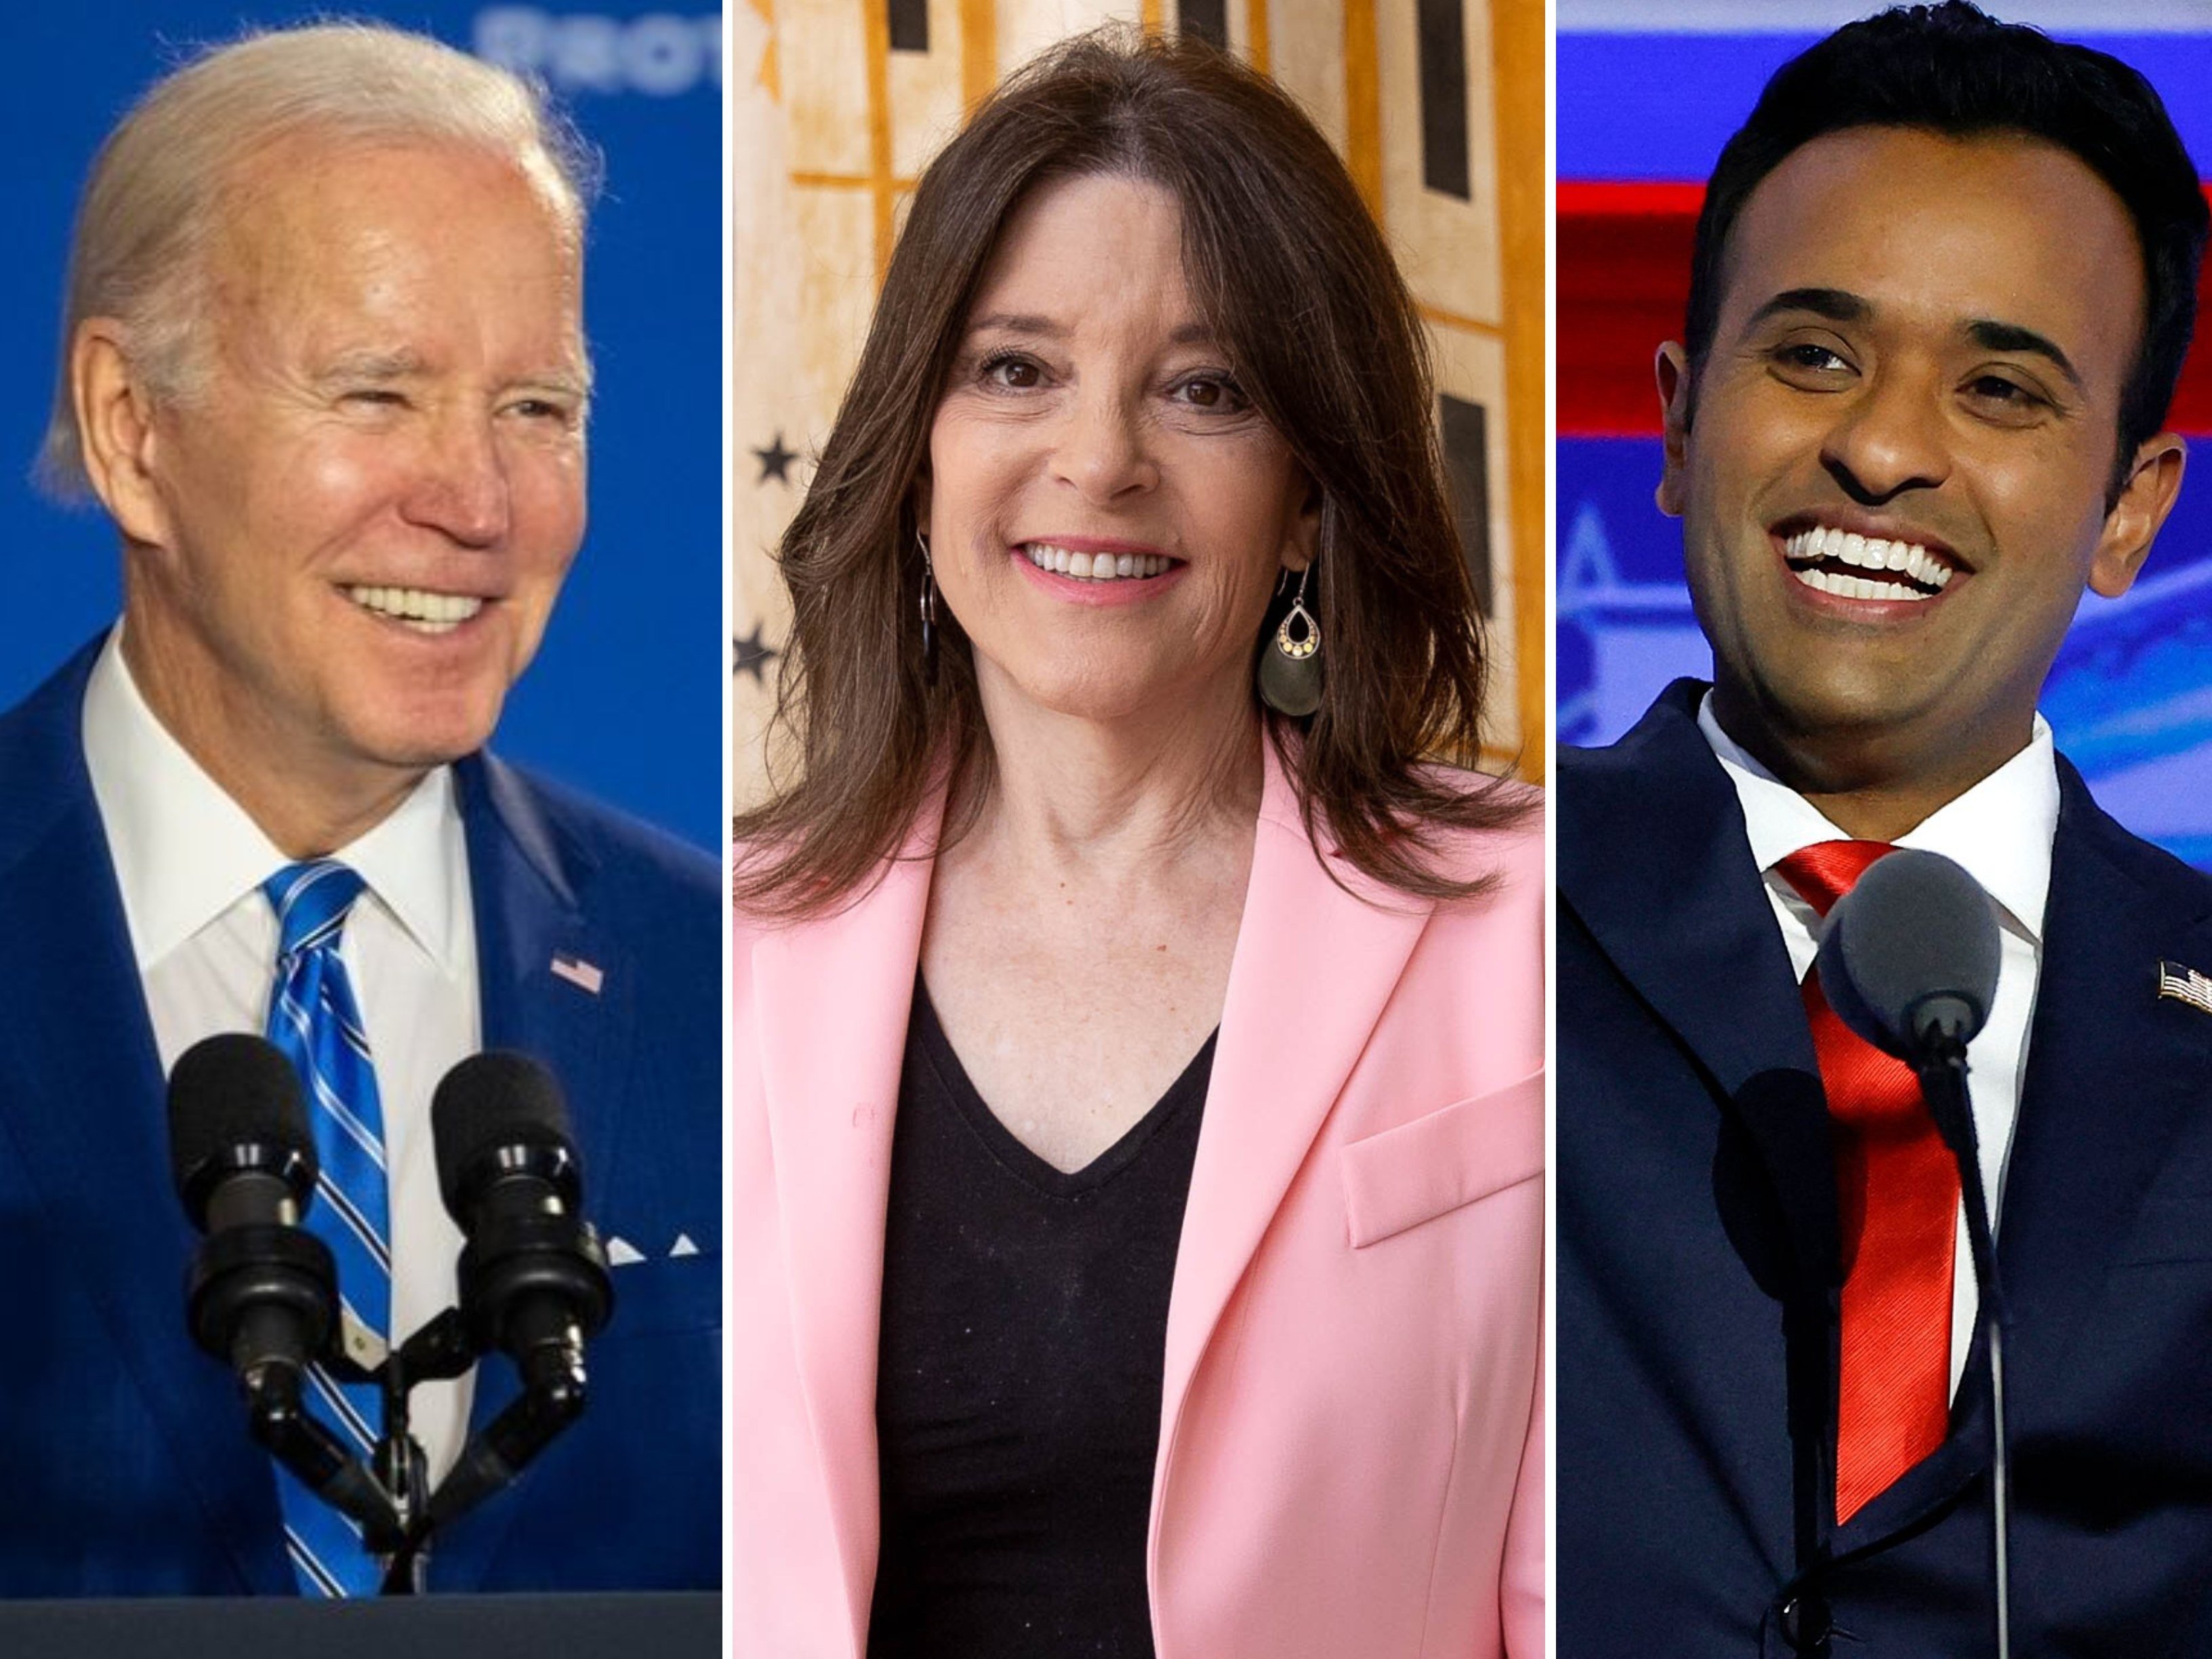 Presidential candidates net worth revealed